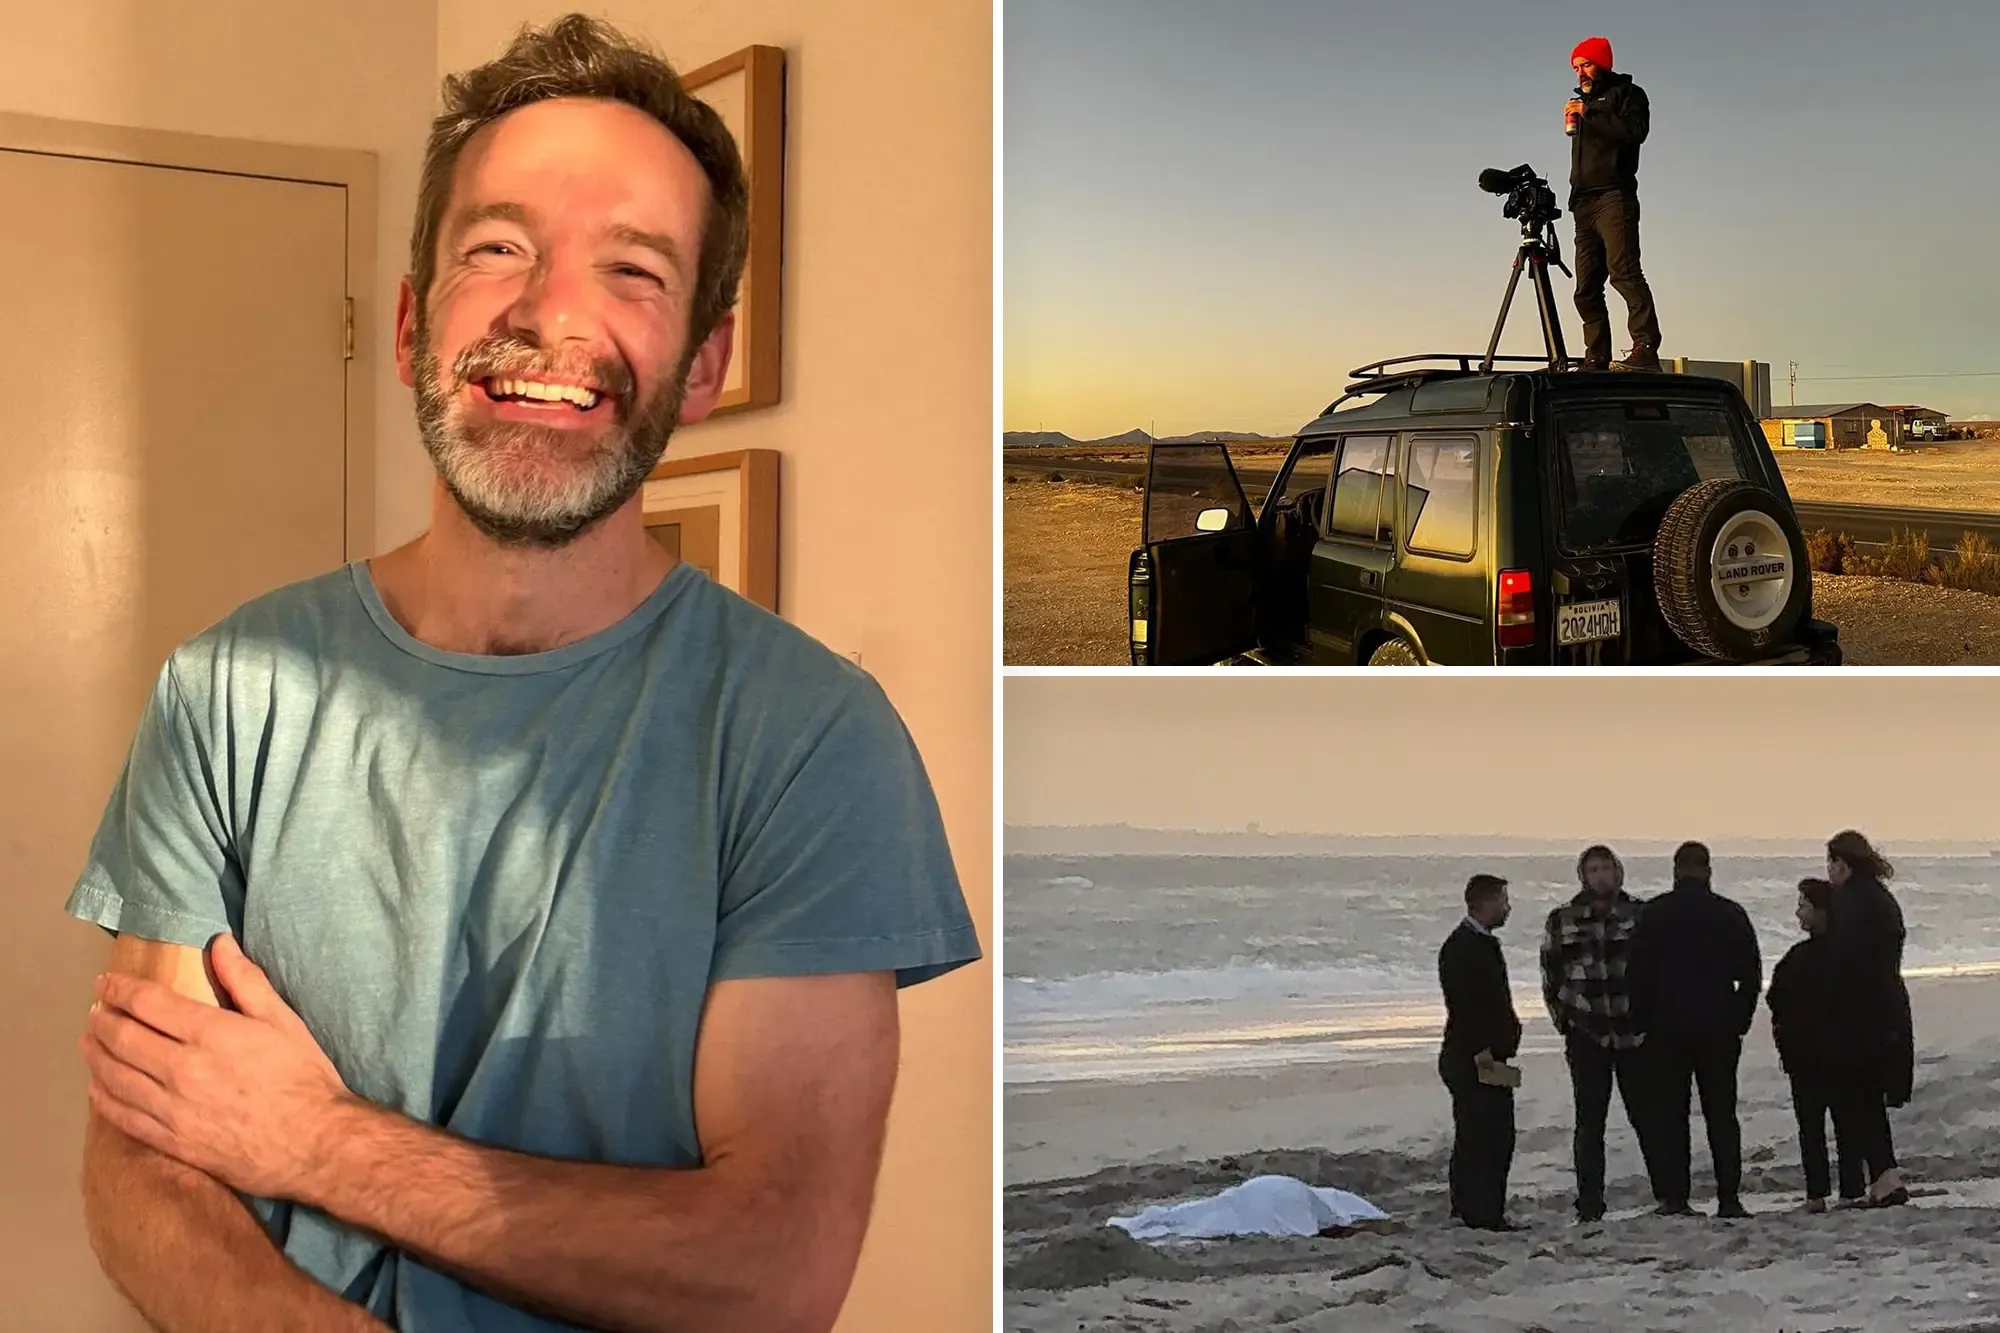 Missing Filmmaker Went ‘Wild Swimming’ Say Friends Who Claim Torso Found on New York Beach Is His